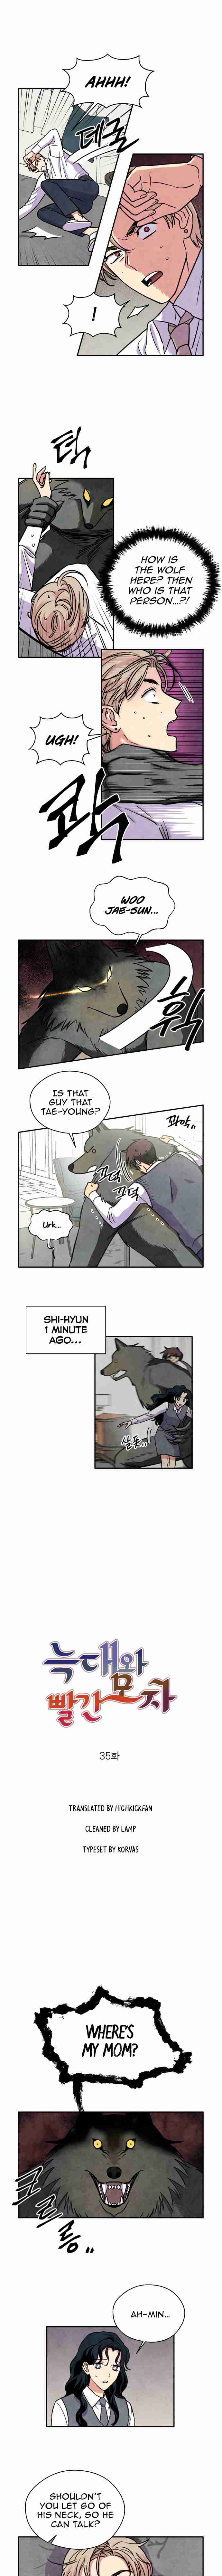 The Little Red Riding Hood Ch. 35